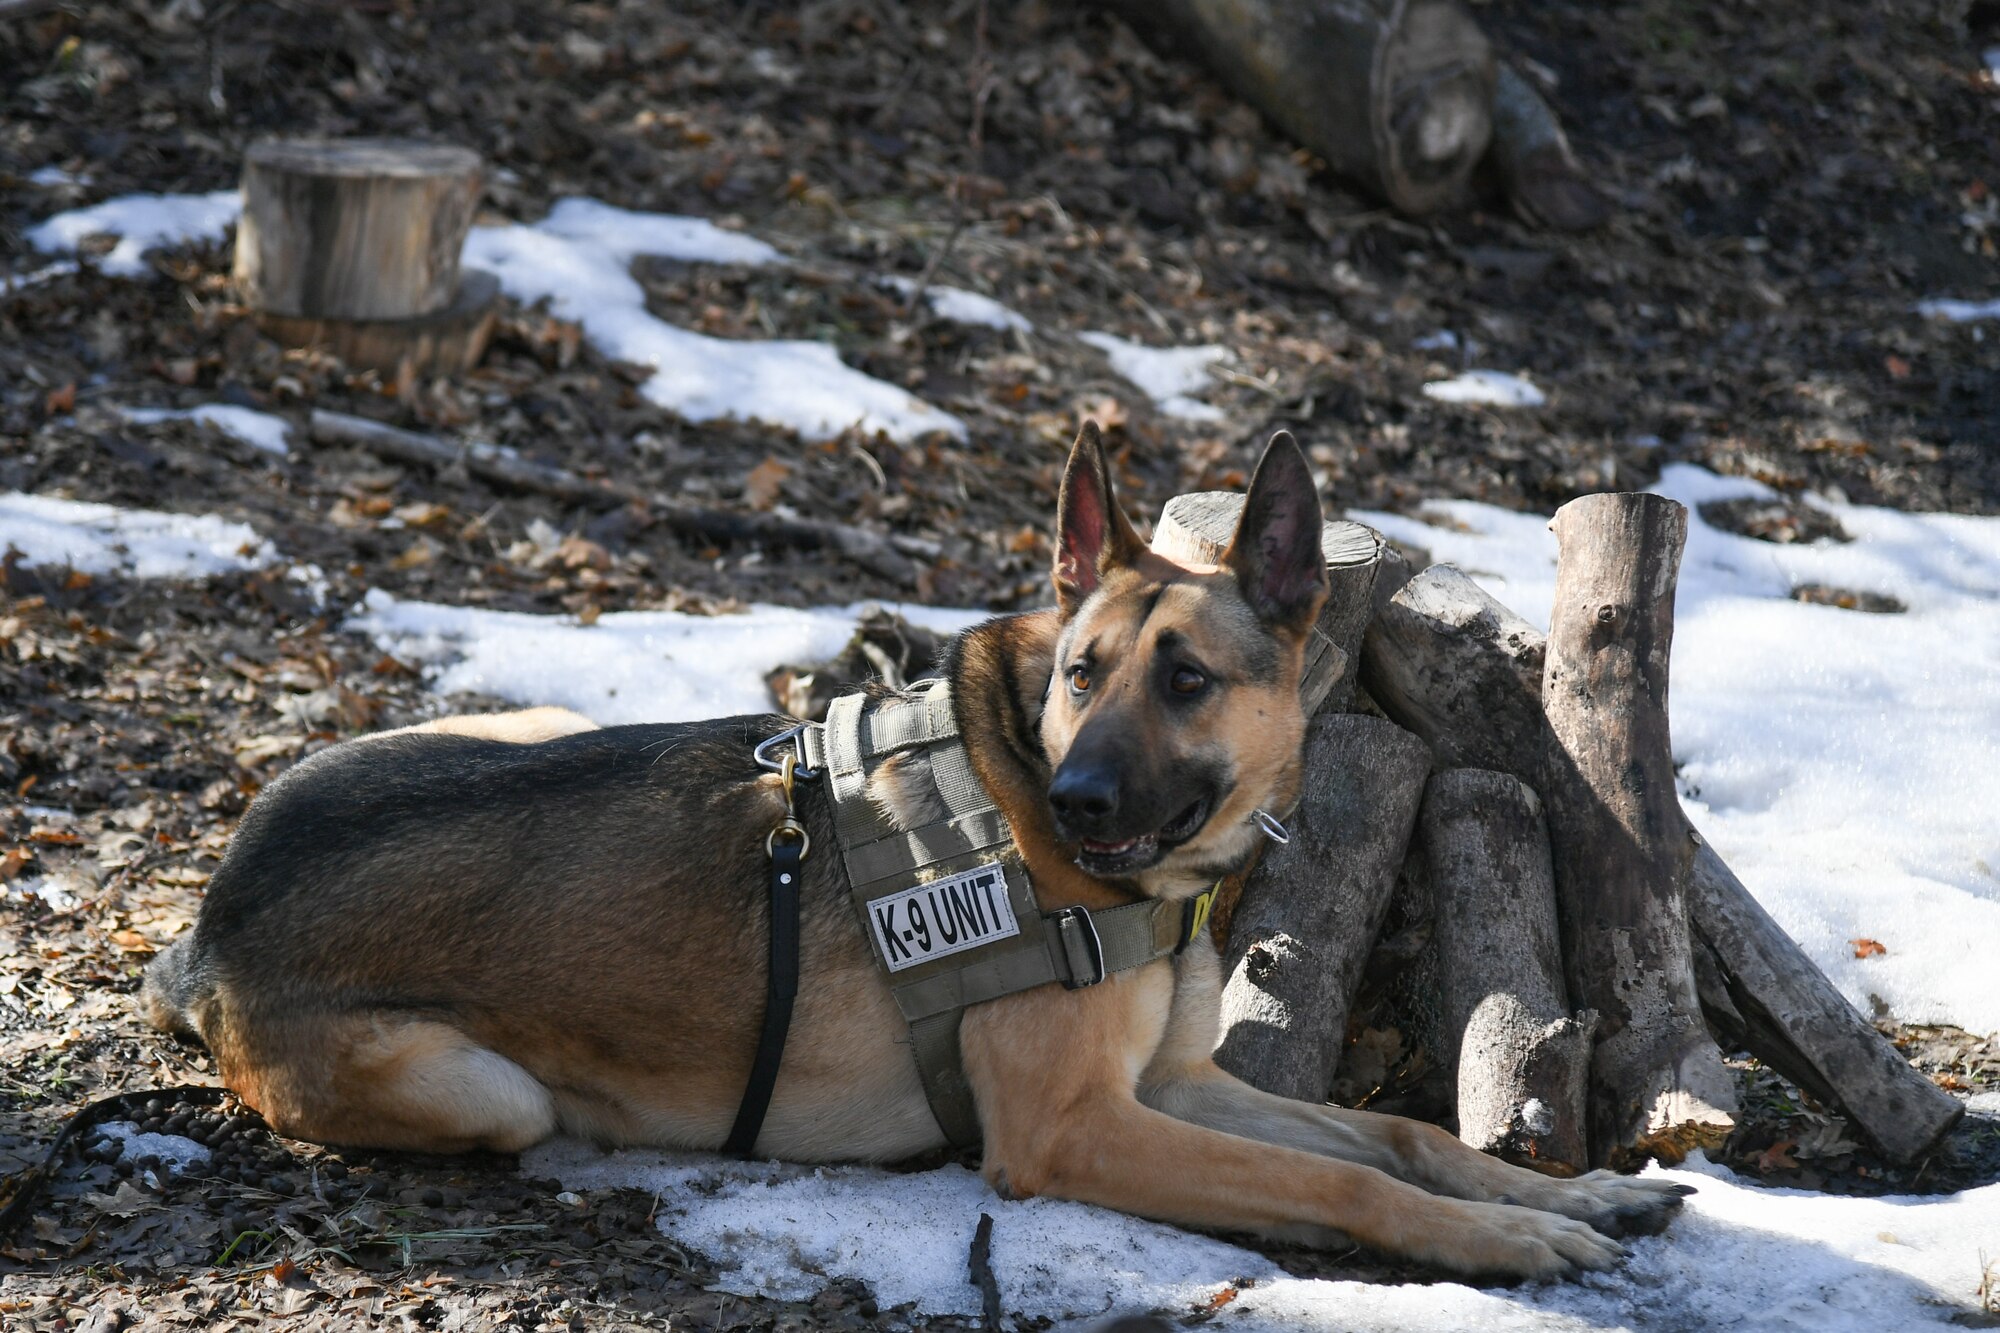 Joe, a military K-9 stationed with 75th Security Force Squadron at Hill Air Force Base, Utah, lays down signaling that he sniffed out an explosive training device March 4, 2020. Joe is a single-purpose MWD, trained as an explosive detection dog. (U.S. Air Force photo by Cynthia Griggs)